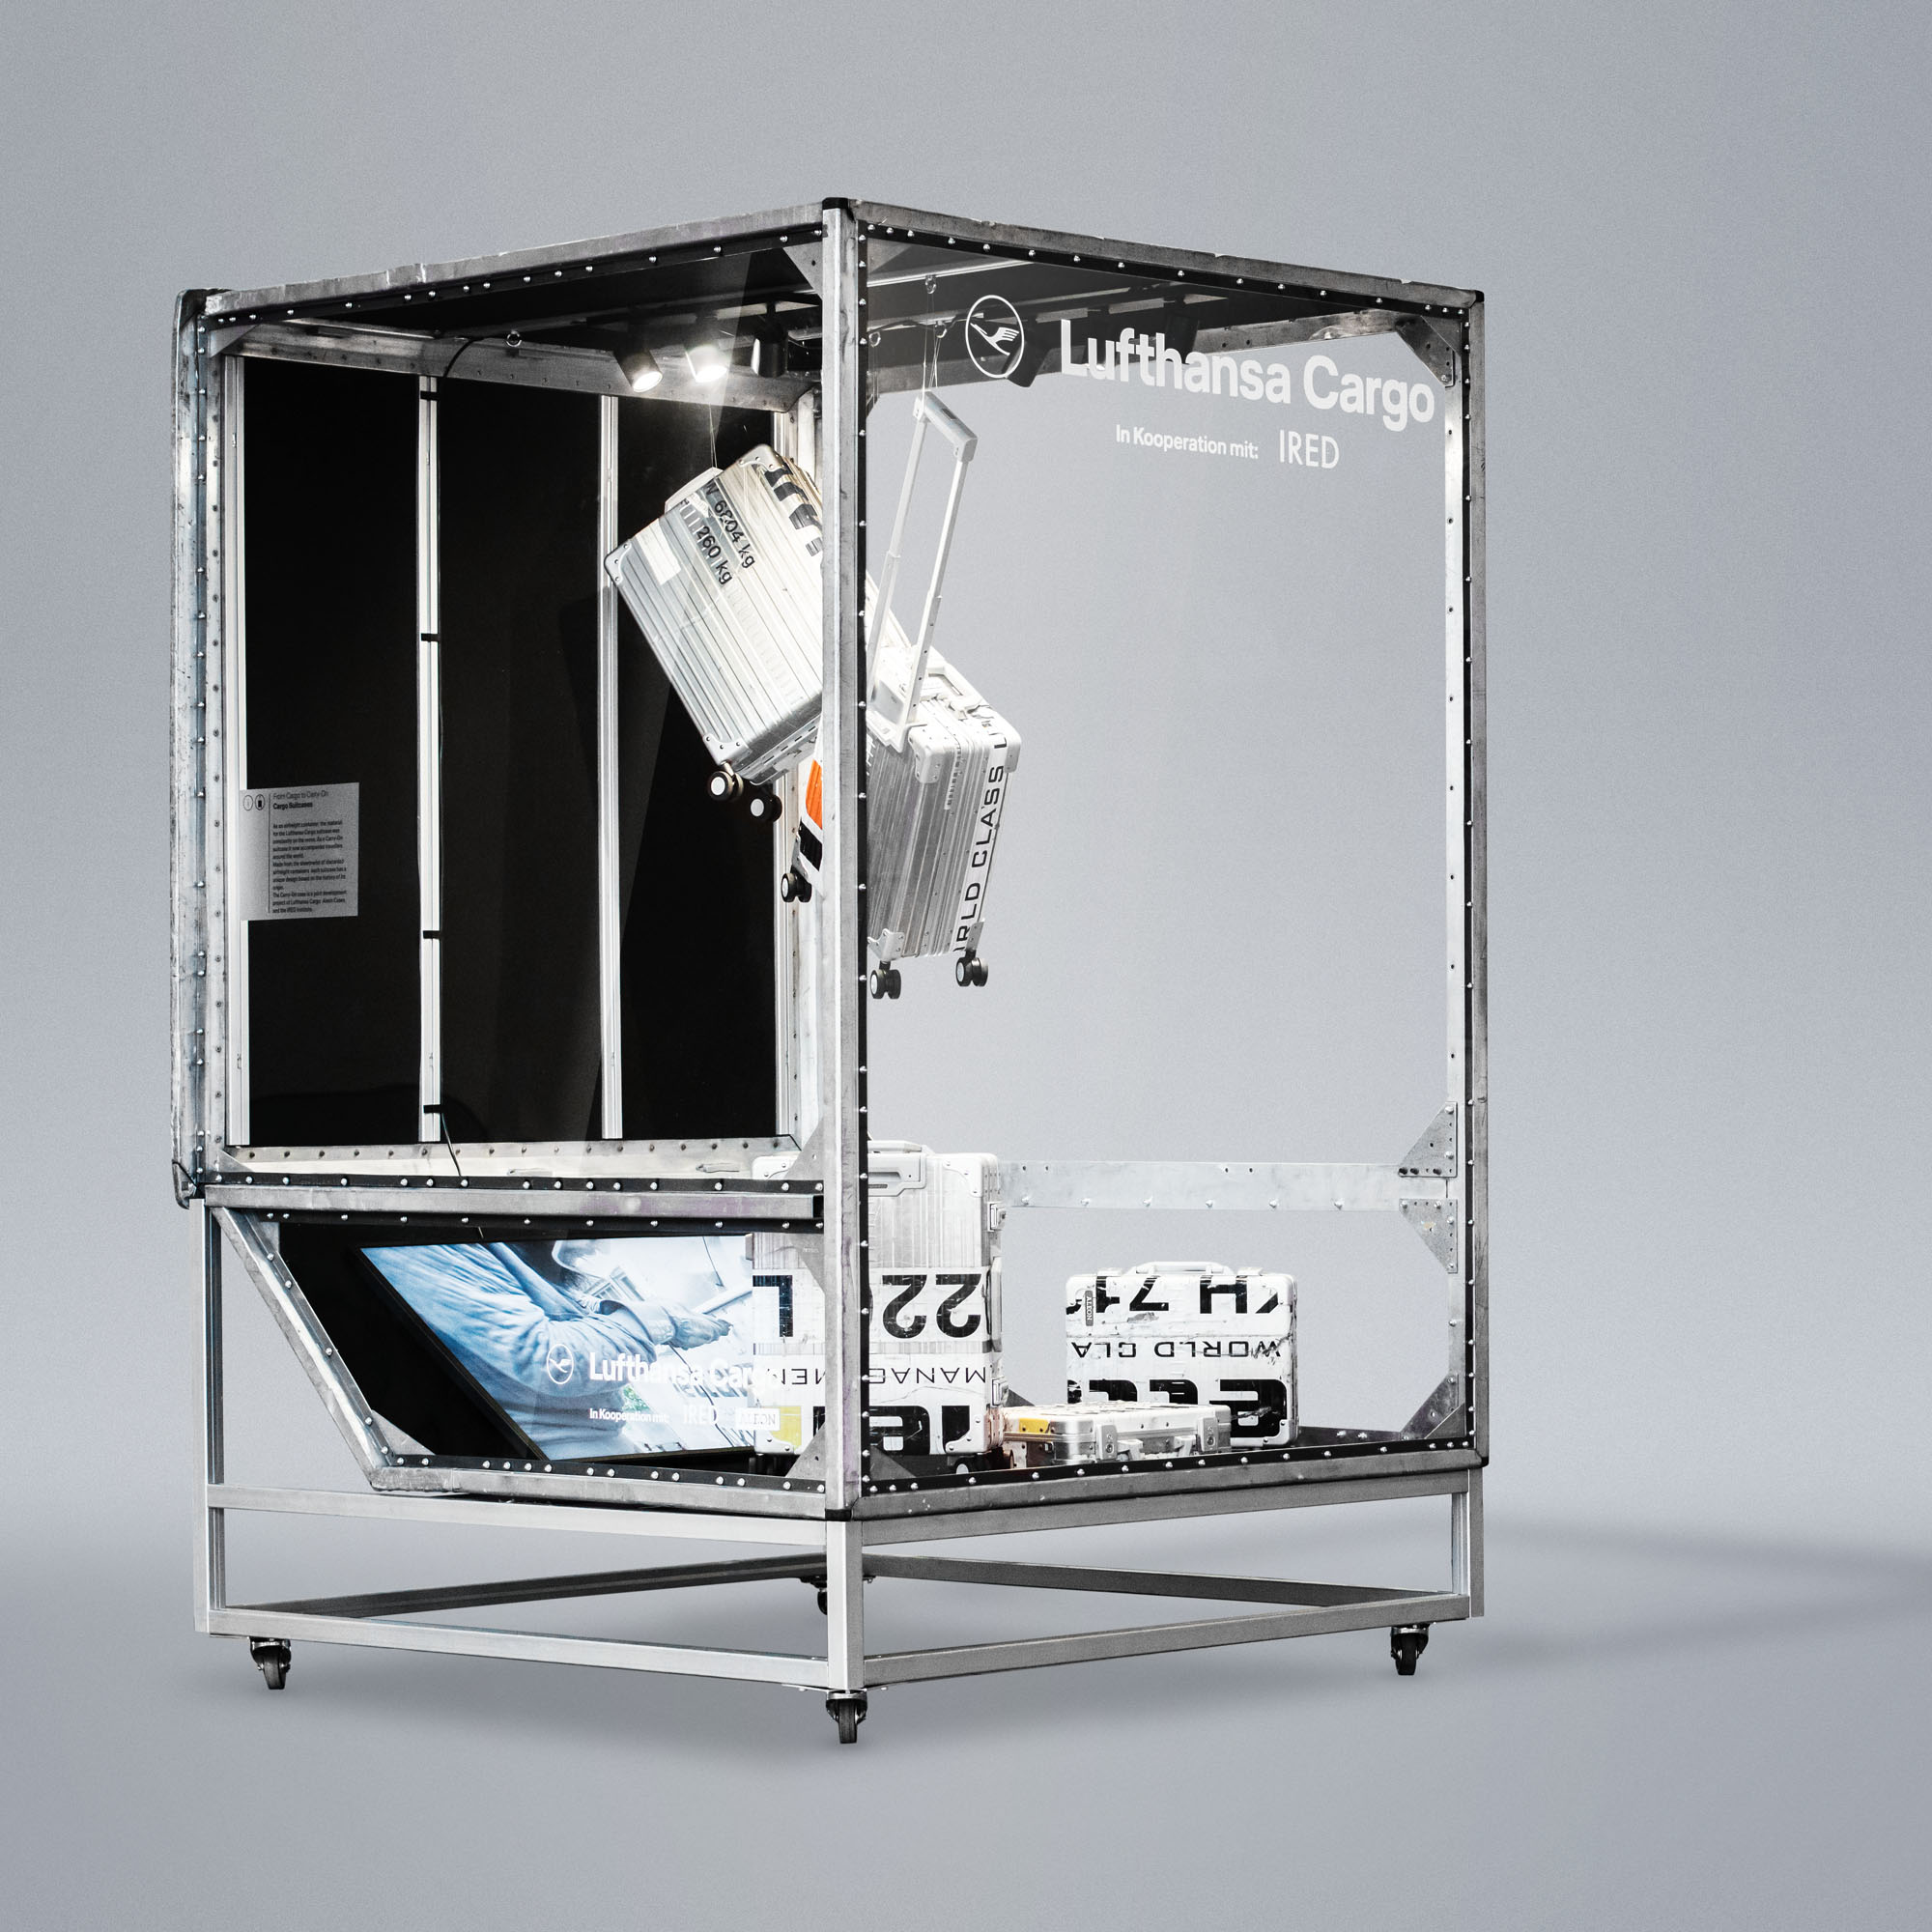 Lufthansa Cargo Display Showcase for exhibitions, design and implementation IRED Institute